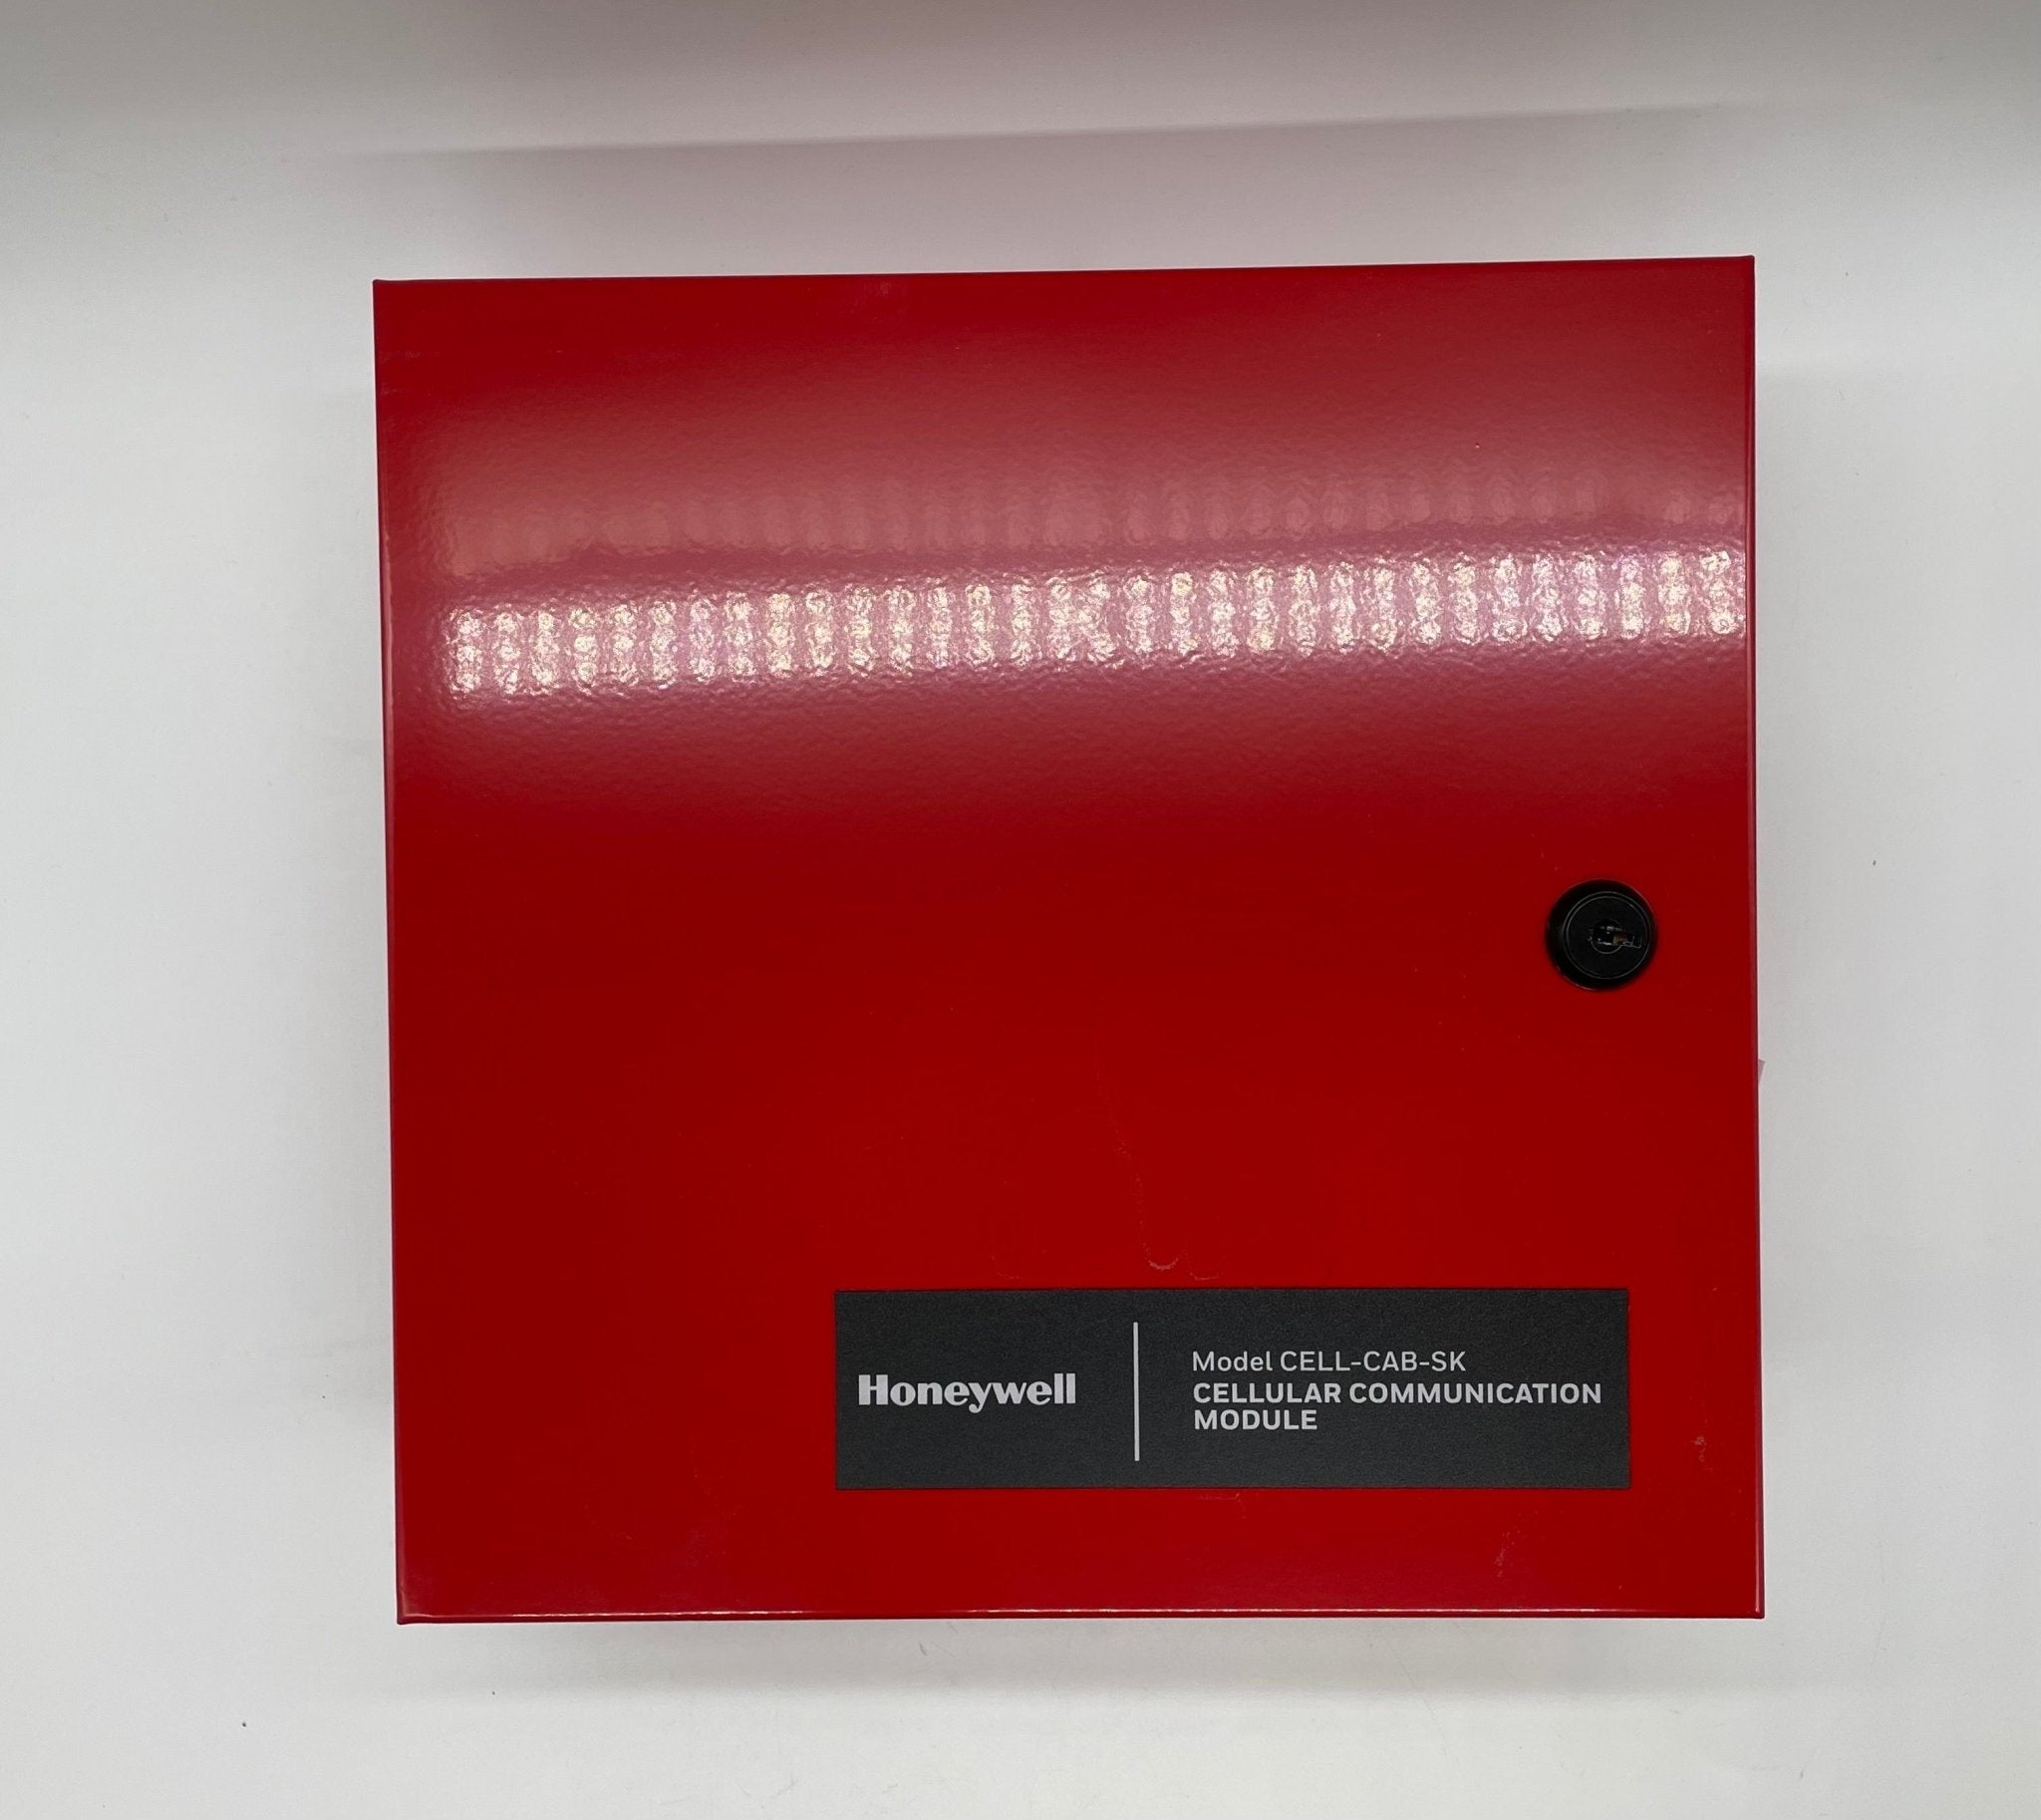 Silent Knight CELL-CAB-SK - The Fire Alarm Supplier